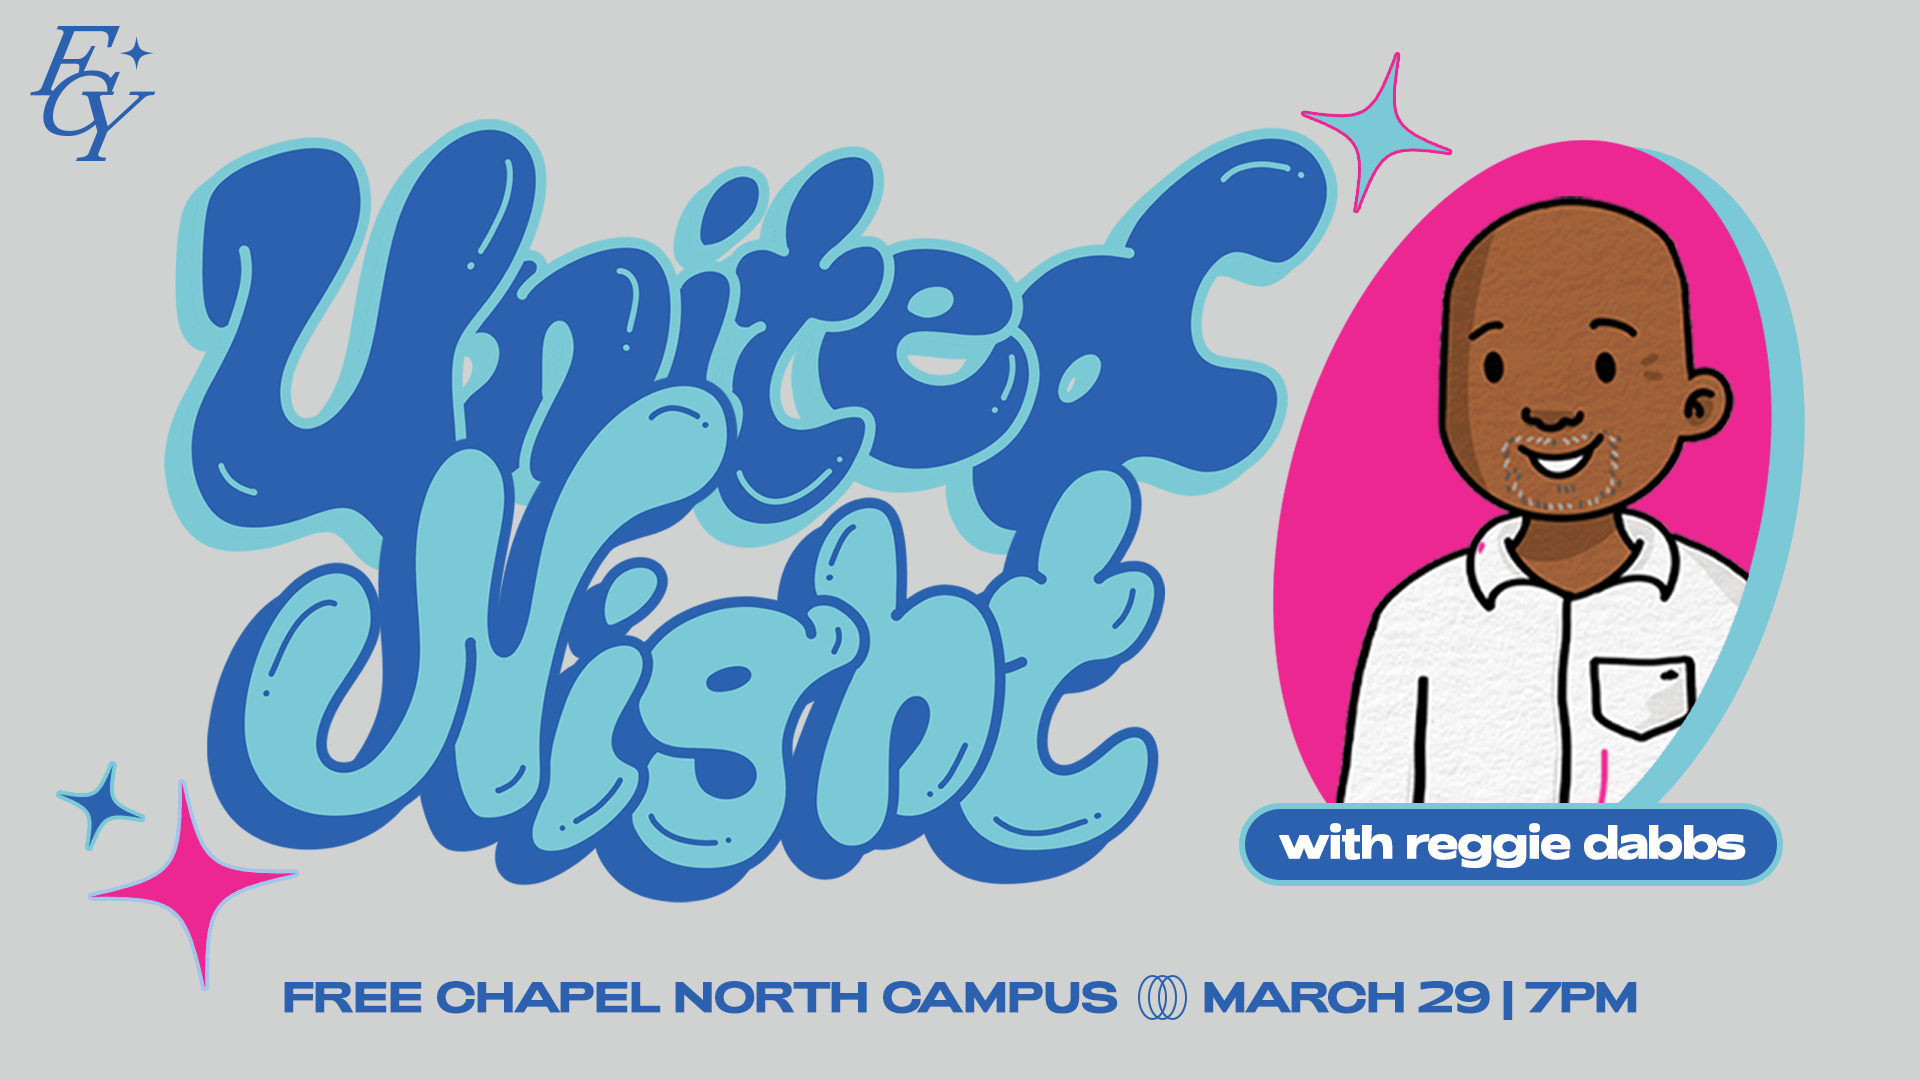 FCY United Night with Reggie Dabbs at the Midtown campus